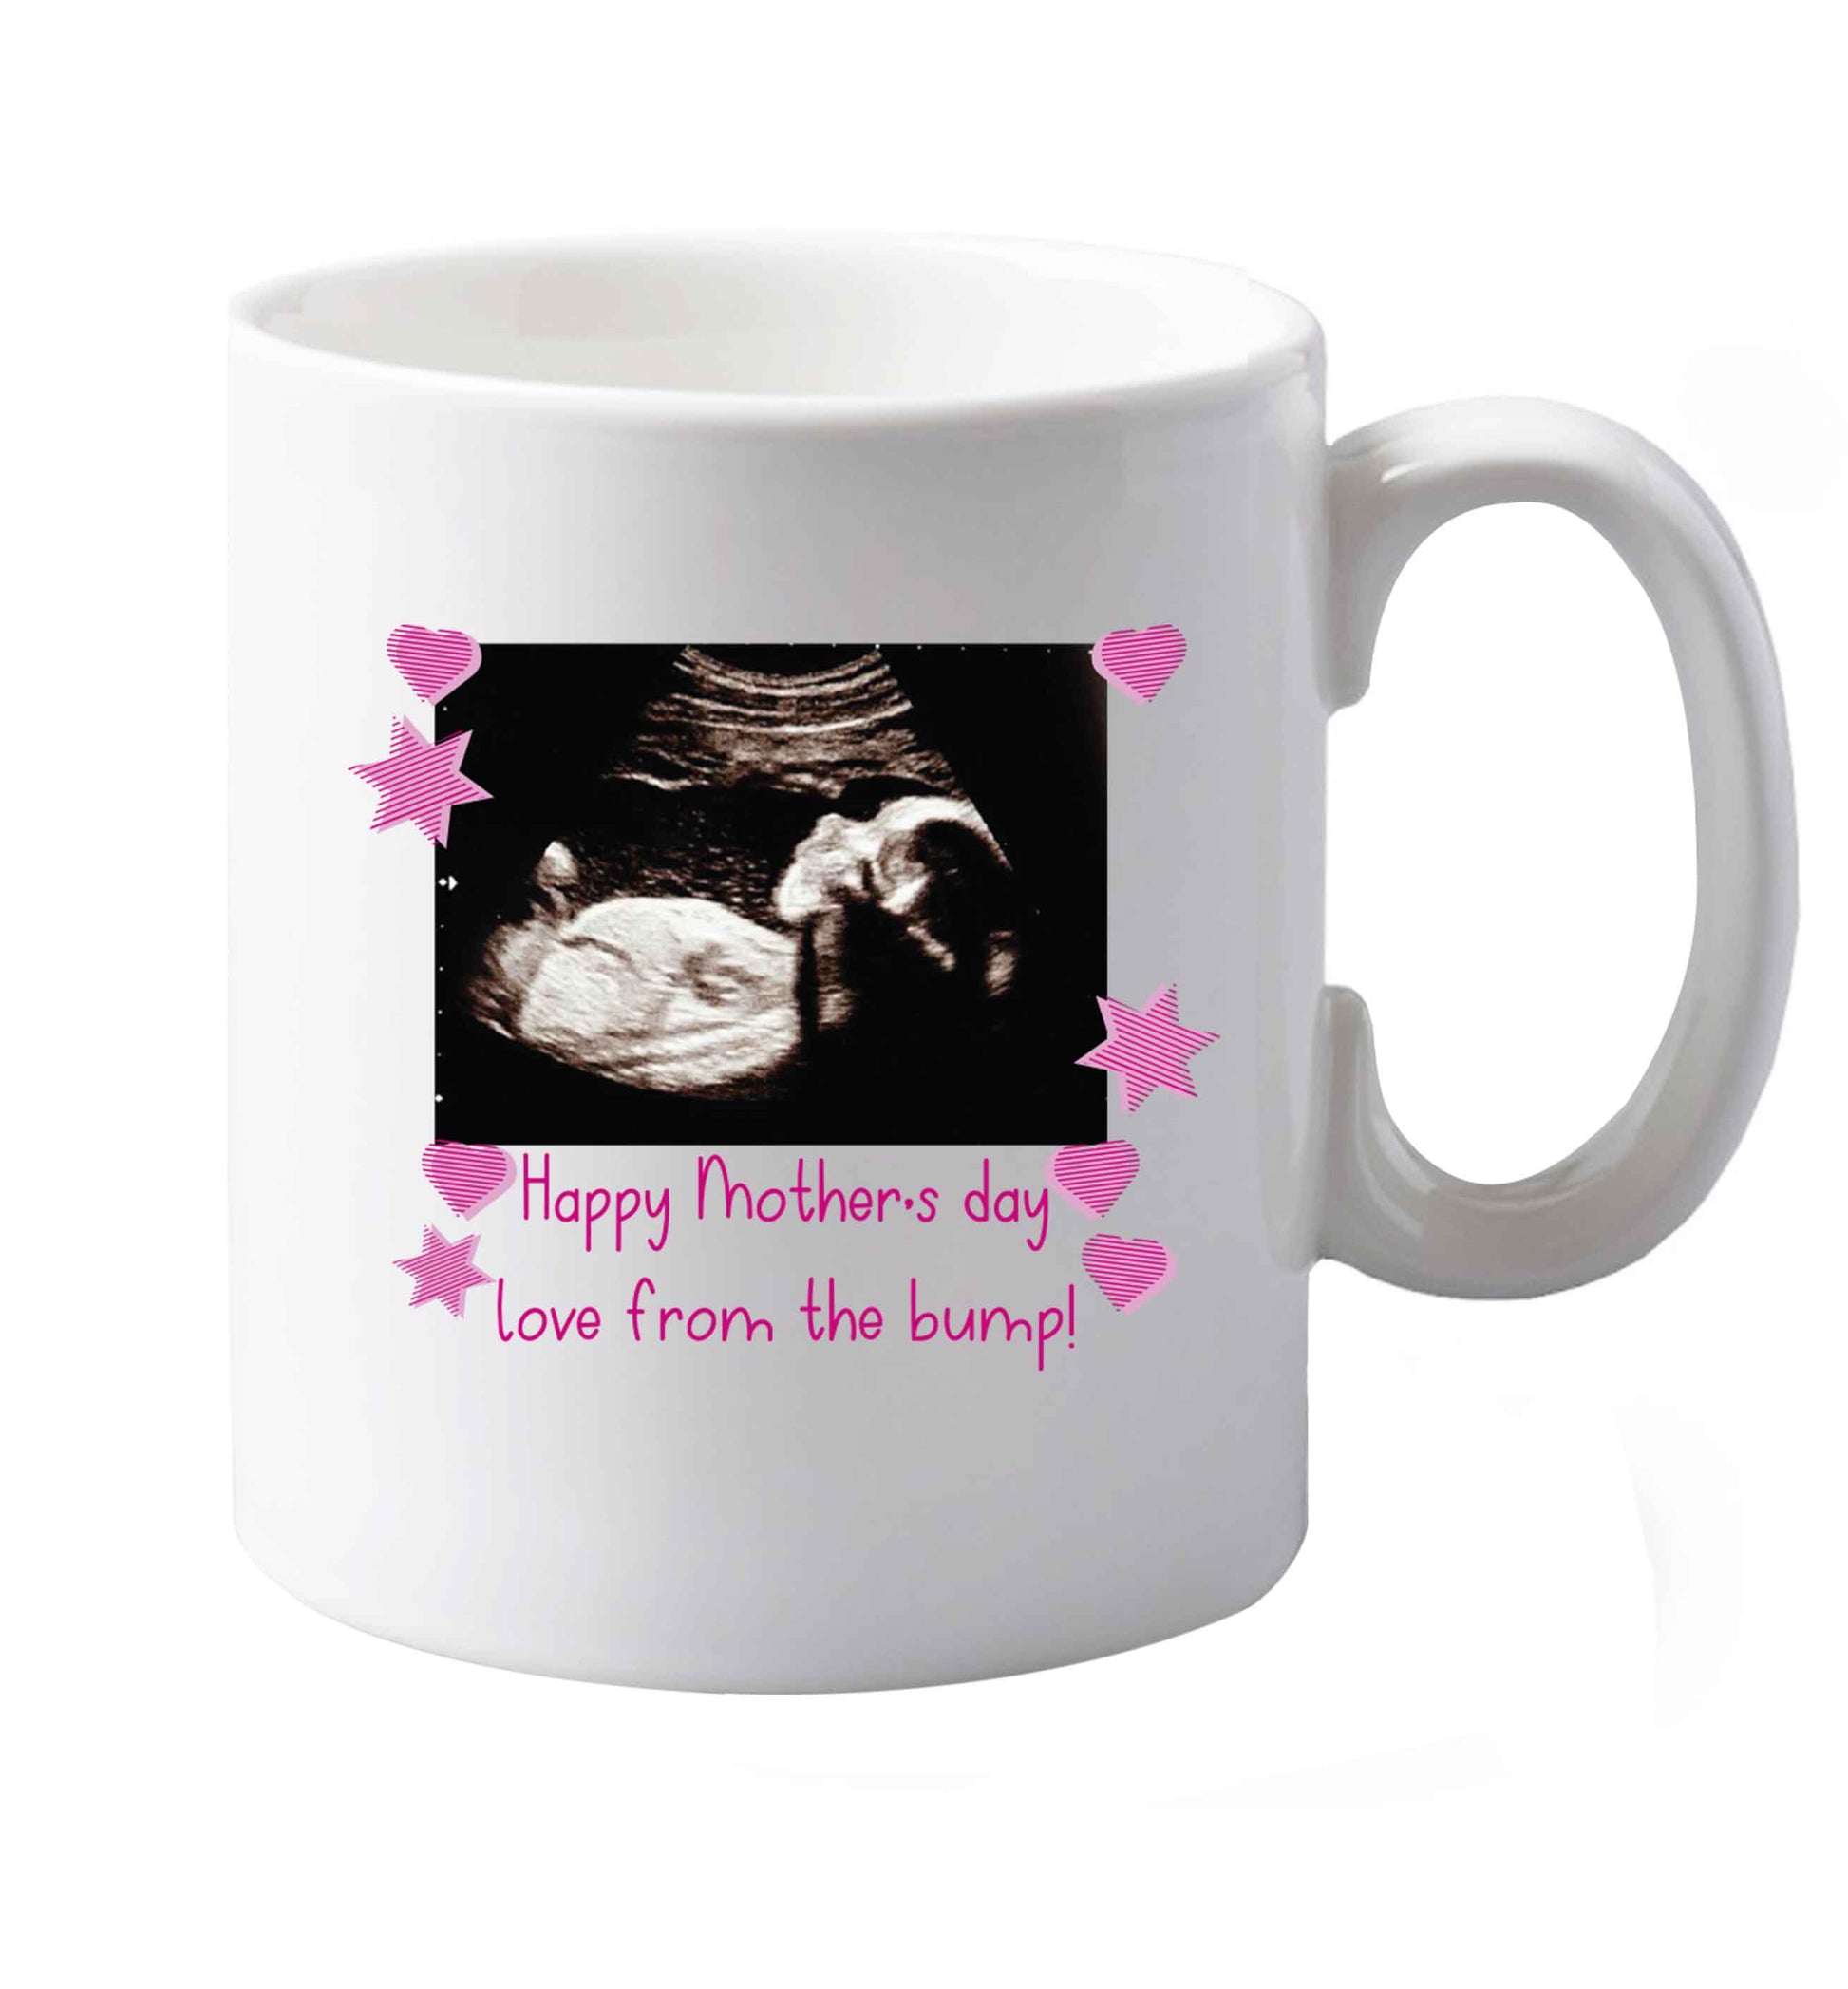 10 oz Happy Mother's day love from the bump - pink  ceramic mug both sides